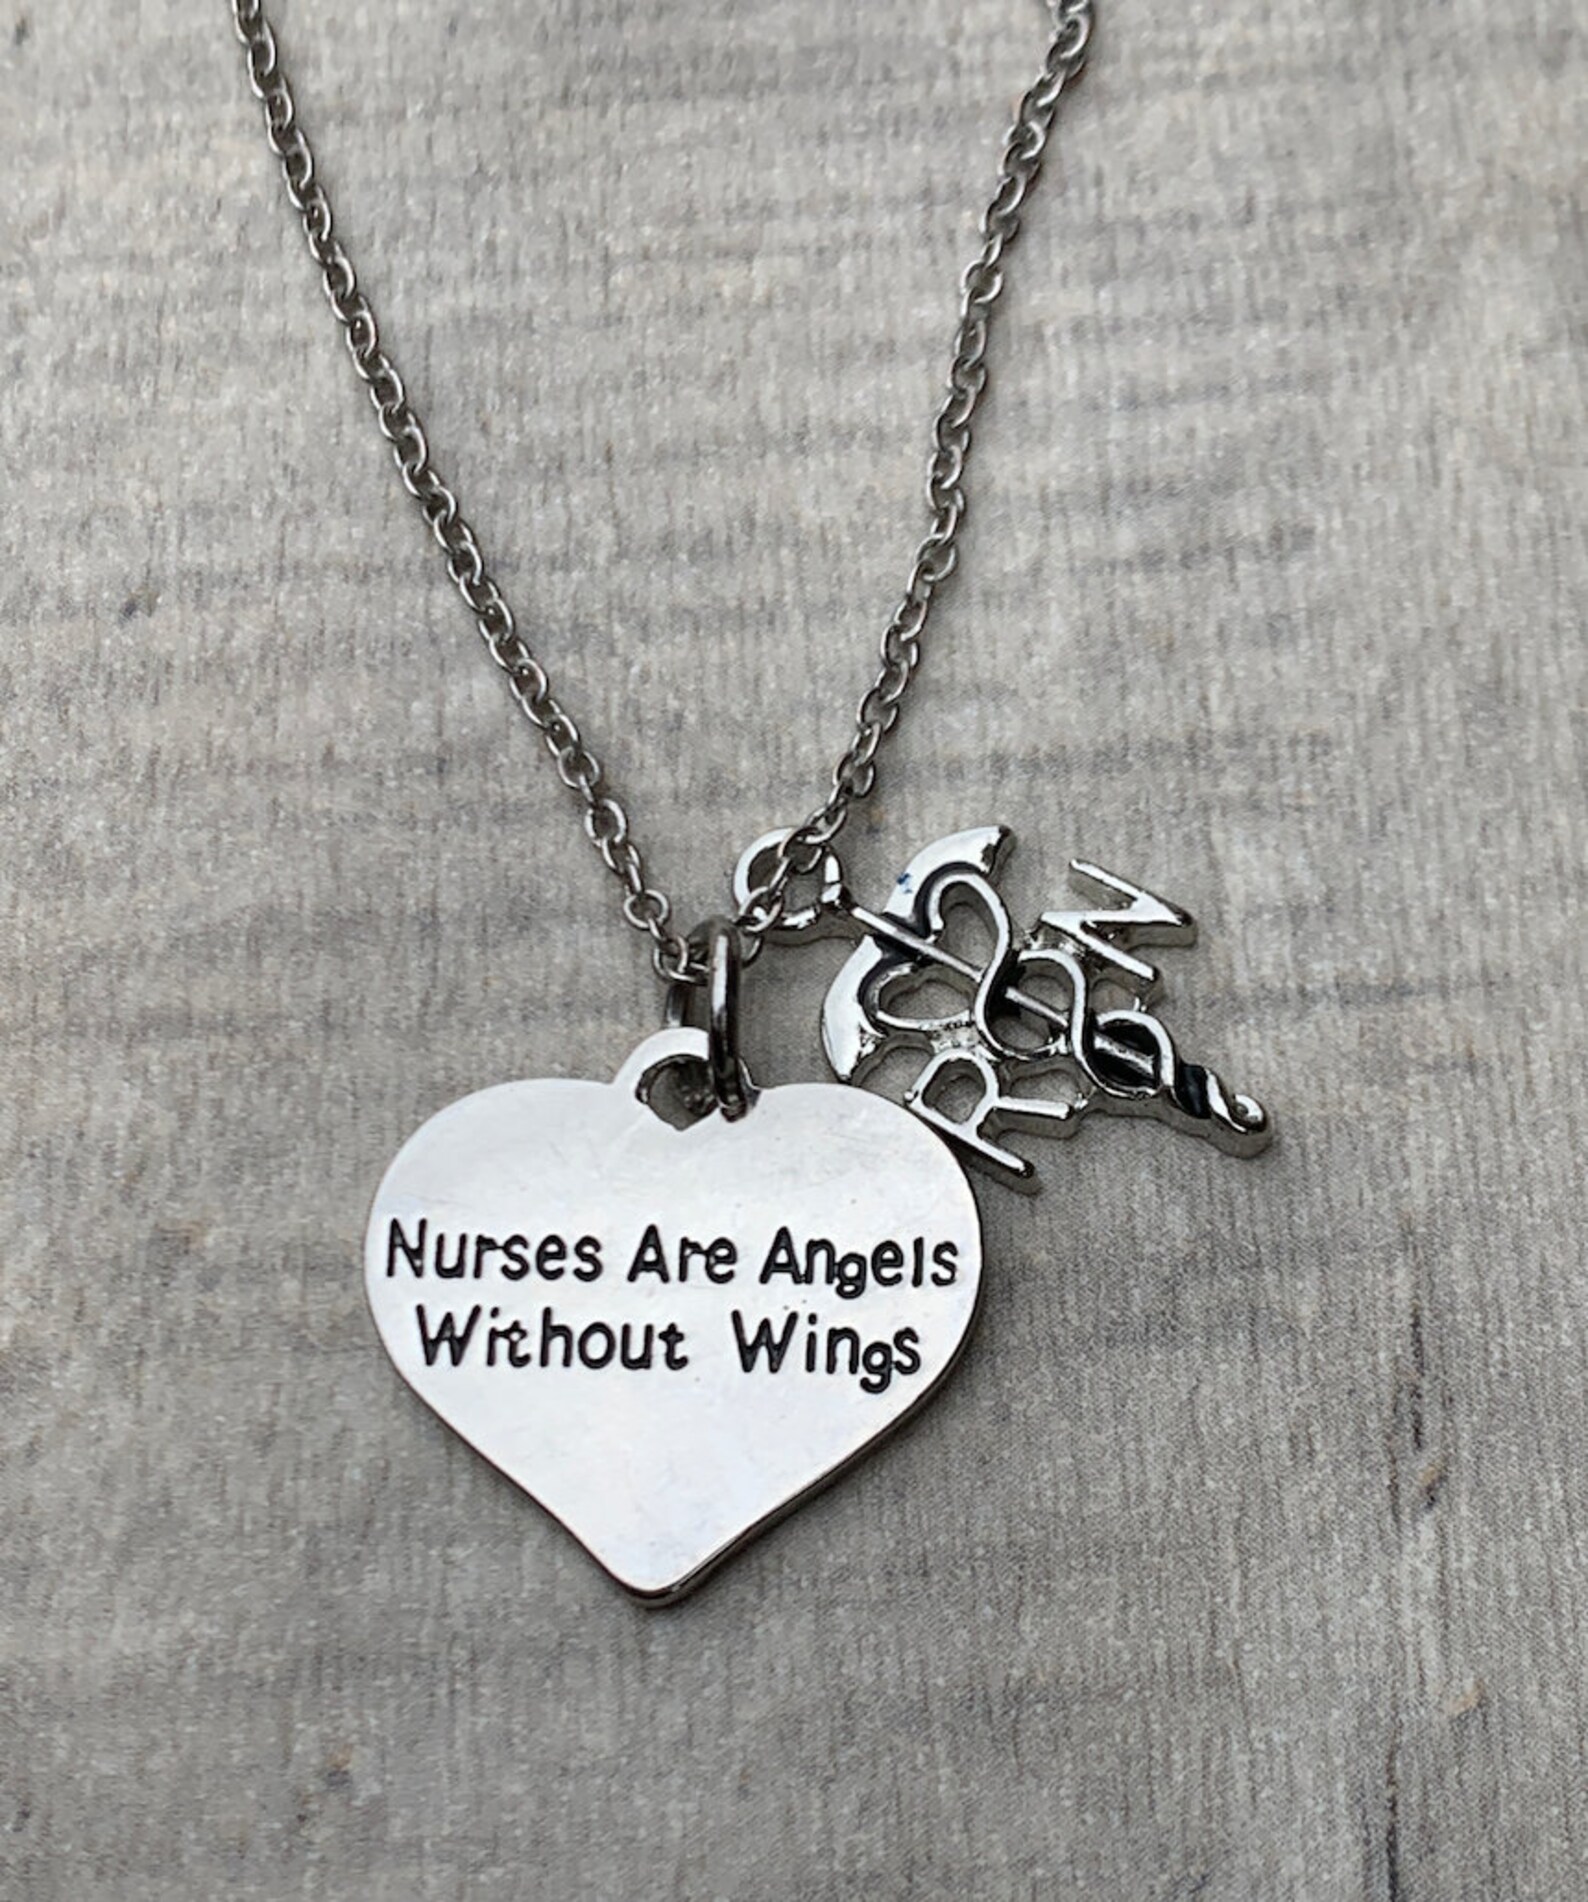 Nurse Necklace Nurses are Angels Without Wings Pendent | Etsy